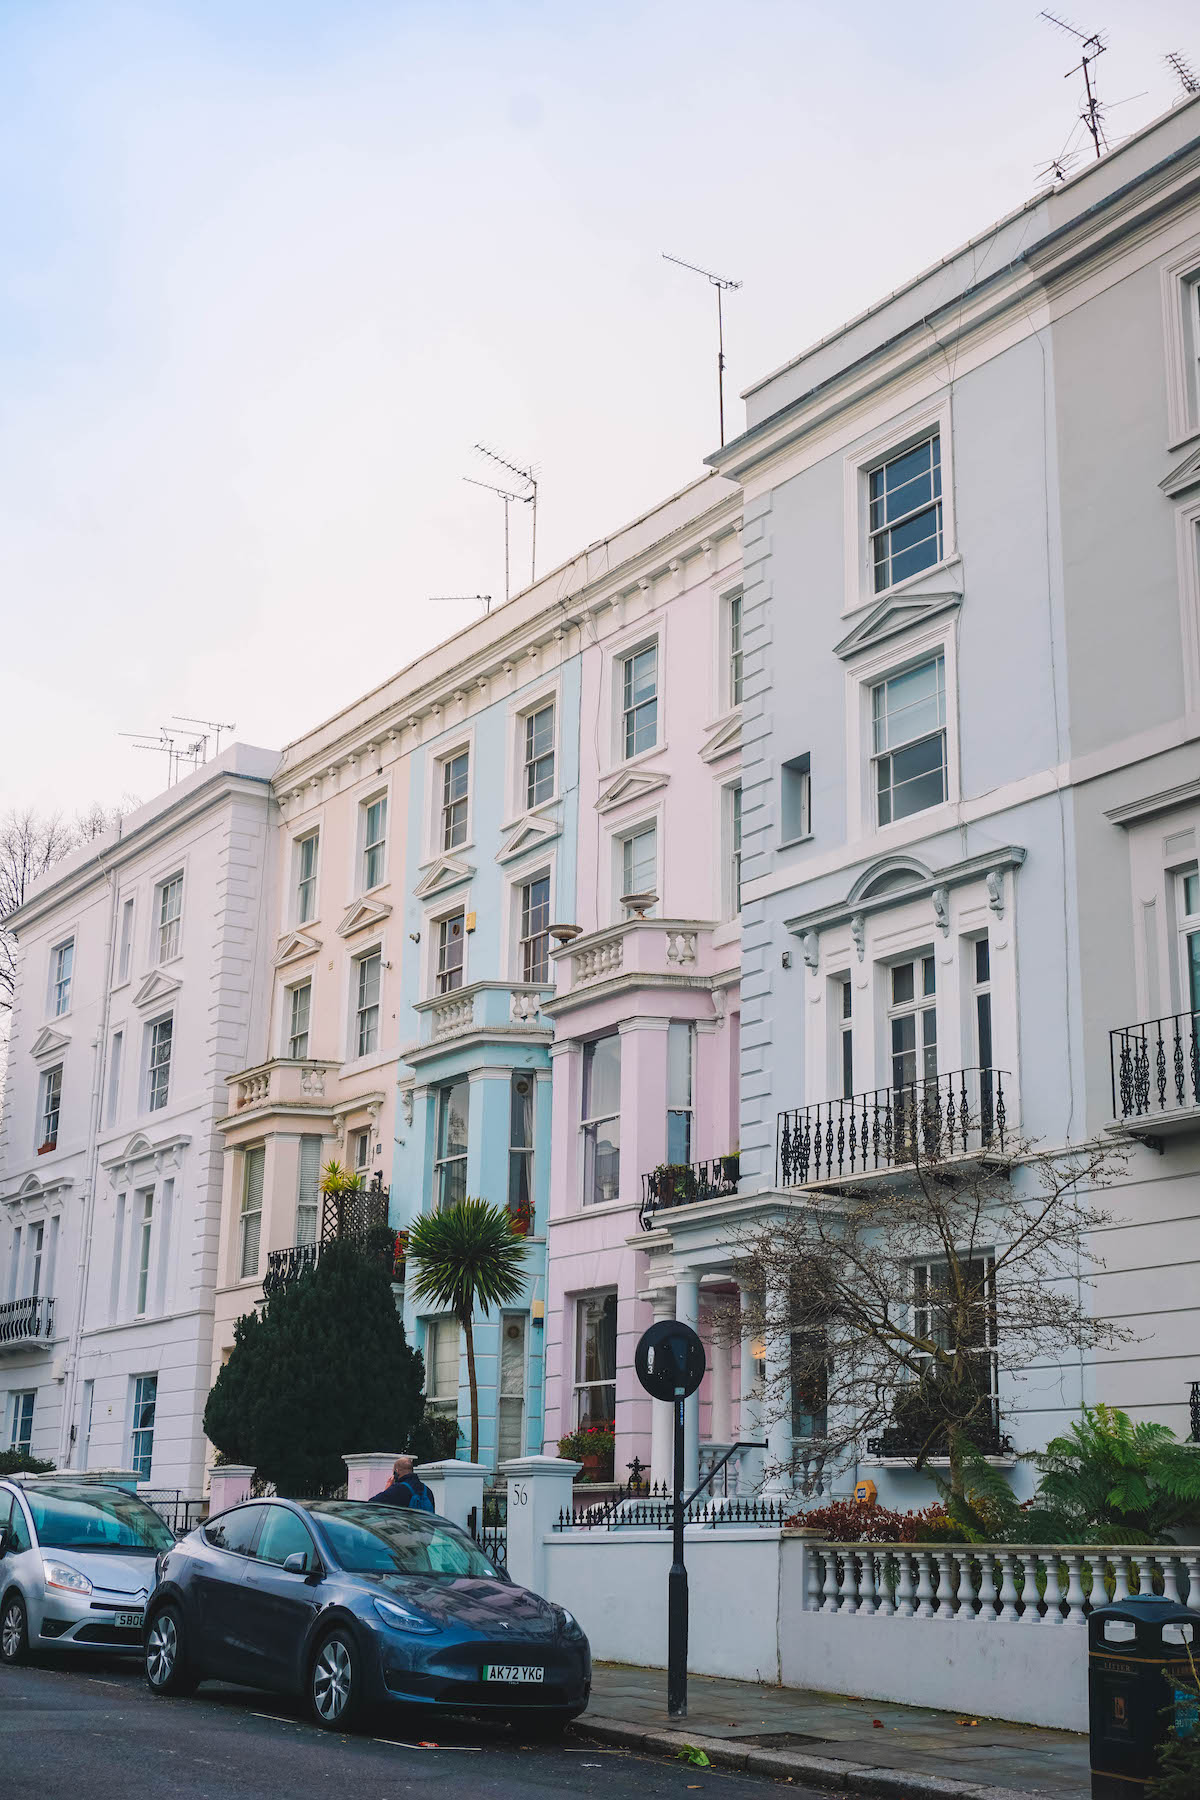 Pastel row houses in Notting Hill, London